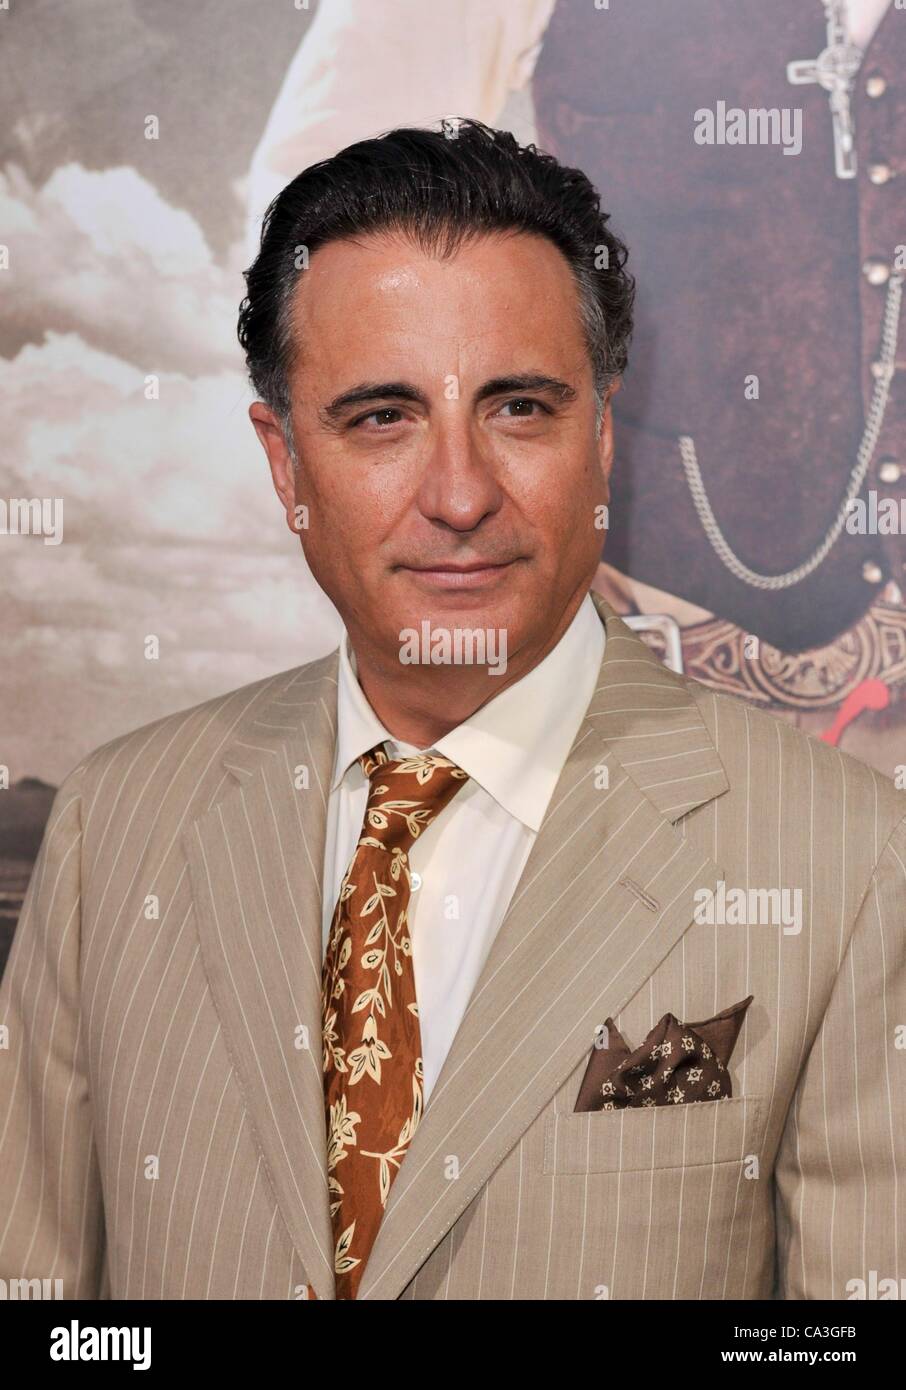 Andy Garcia at arrivals for FOR GREATER GLORY Premiere, Samuel Goldwyn Theatre at AMPAS, Los Angeles, CA May 31, 2012. Photo By: Elizabeth Goodenough/Everett Collection Stock Photo